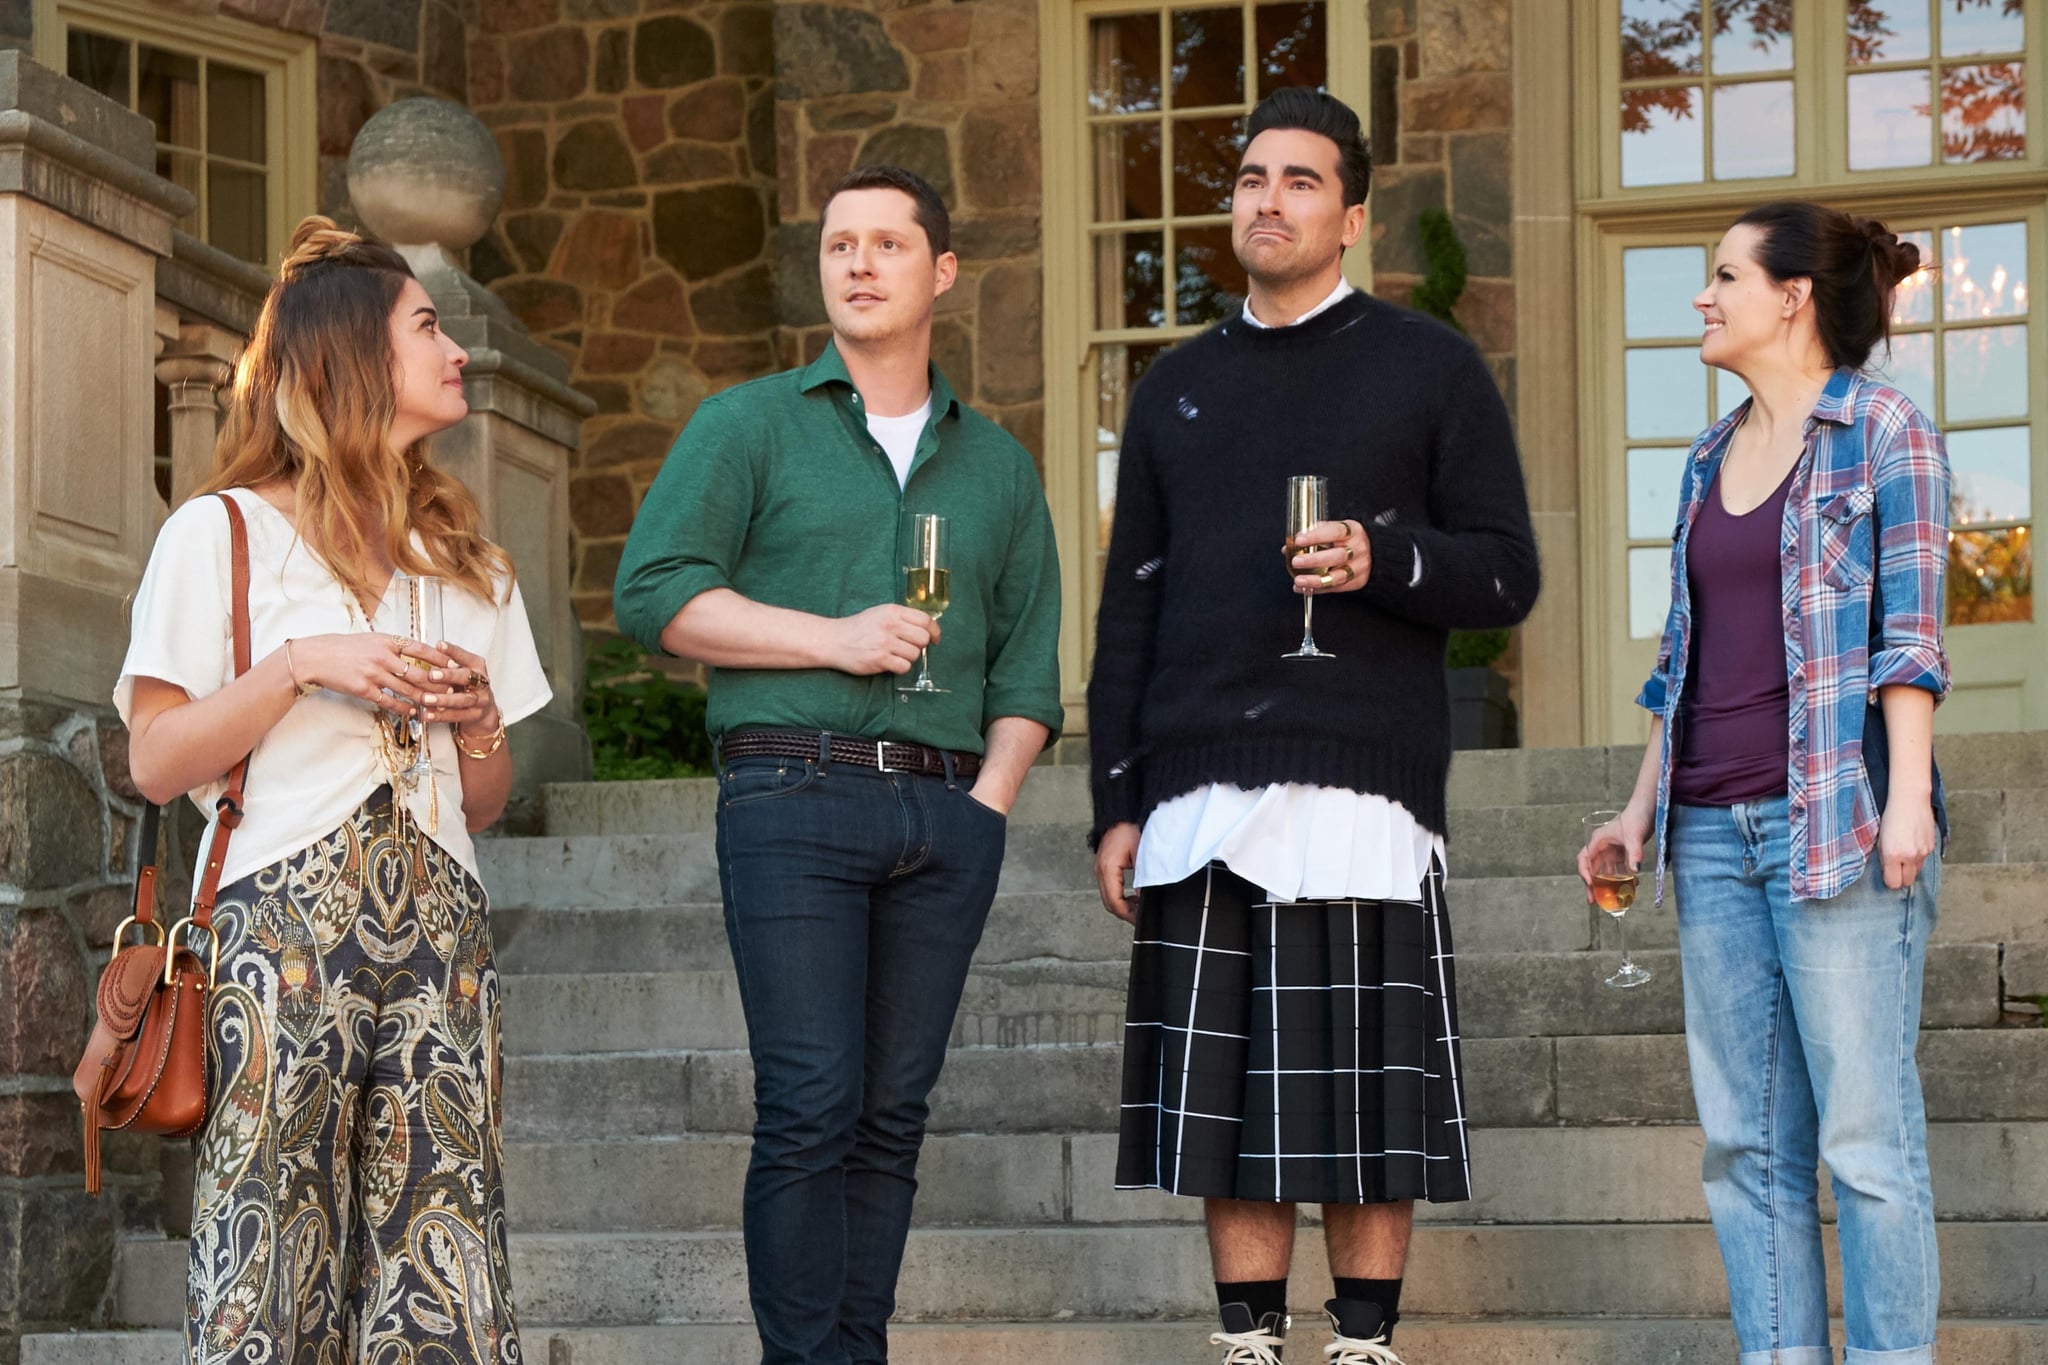 SCHITT'S CREEK, from left: Annie Murphy, Noah Reid, Daniel Levy, Emily Hempshire, 'Smoke Signals', (Season 6, ep. 601, aired in the US on Jan. 7, 2020). photo: CBC / courtesy Everett Collection